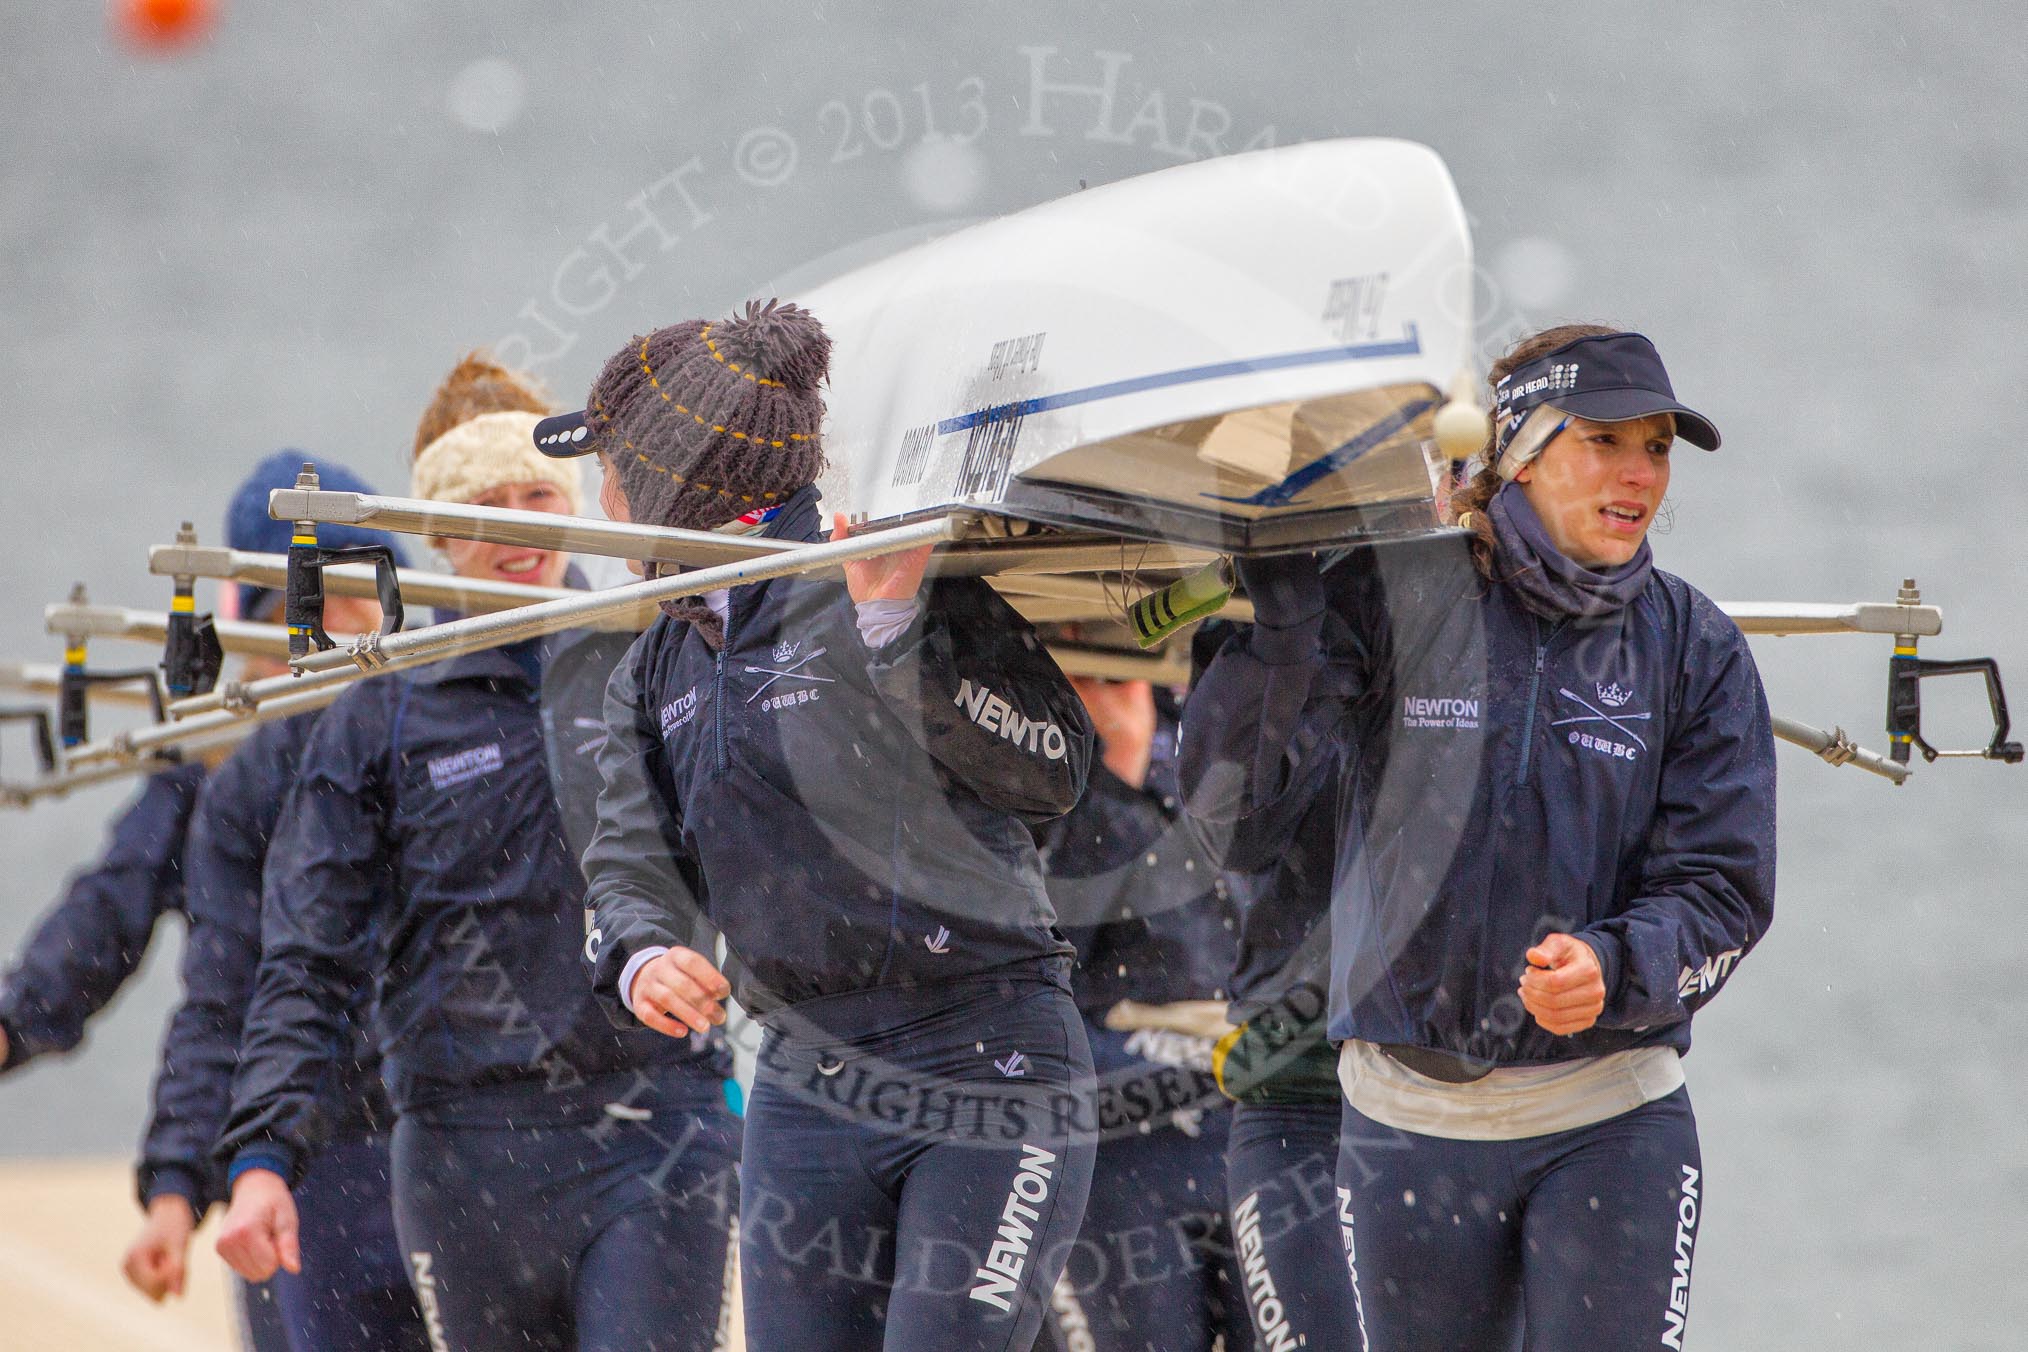 The Boat Race season 2013 - fixture OUWBC vs Olympians: The crew of the OUWBC reserve boat Osiris, carrying their boat afther a training session in pouring rain and freezing cold at Dorney Lake. In front right bow lady Coralie Viollet-Djelassi..
Dorney Lake,
Dorney, Windsor,
Buckinghamshire,
United Kingdom,
on 16 March 2013 at 09:59, image #4